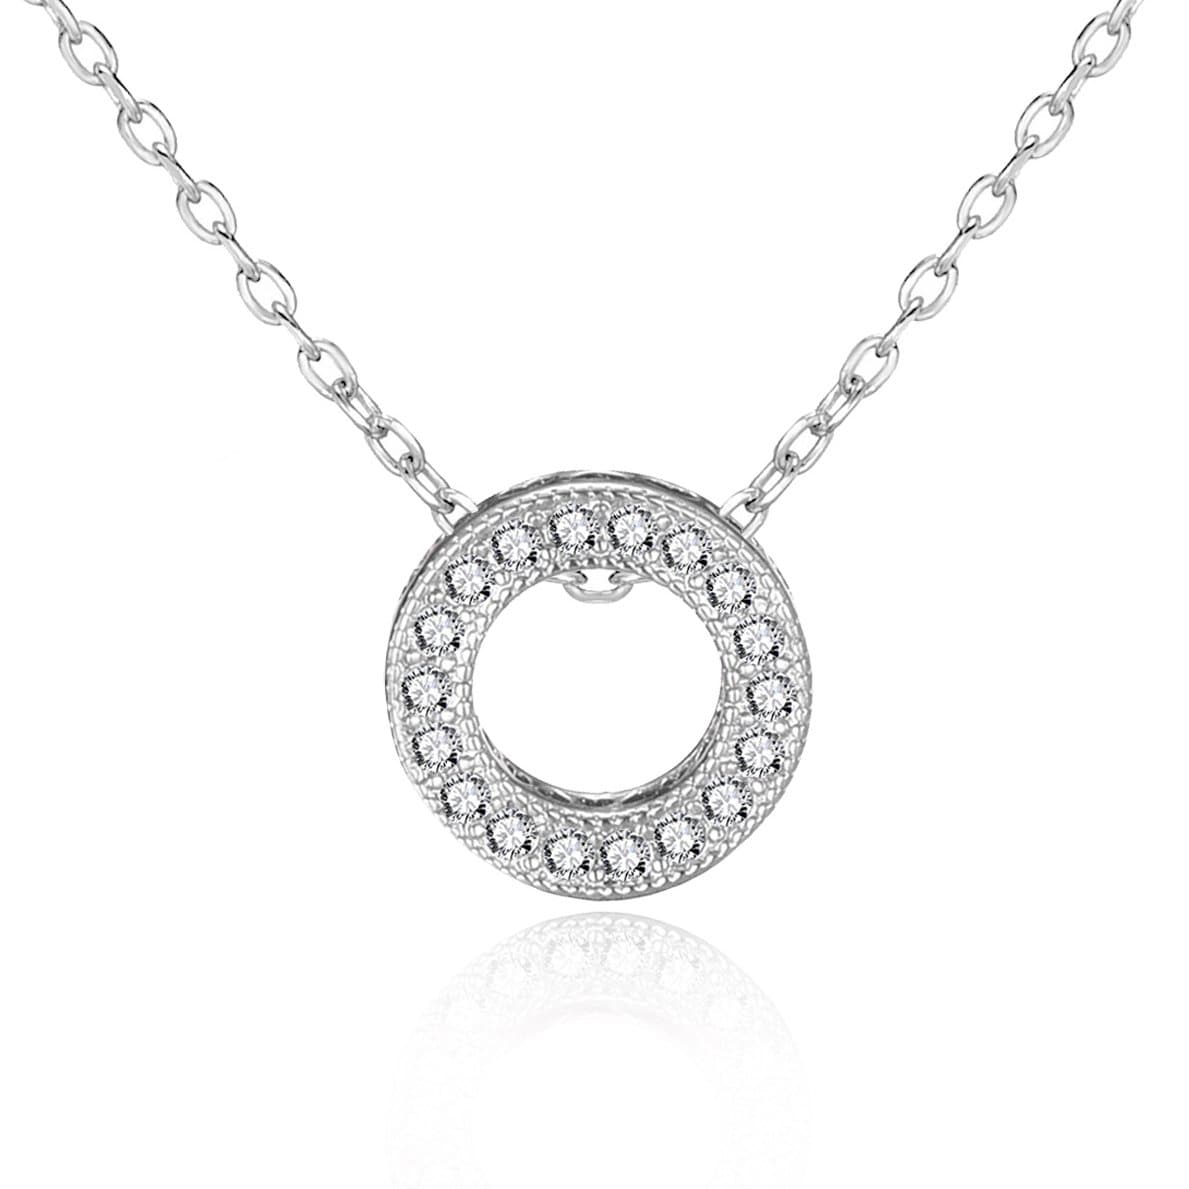 Silver Plated Circle of Life Necklace Created with Zircondia® Crystals by Philip Jones Jewellery